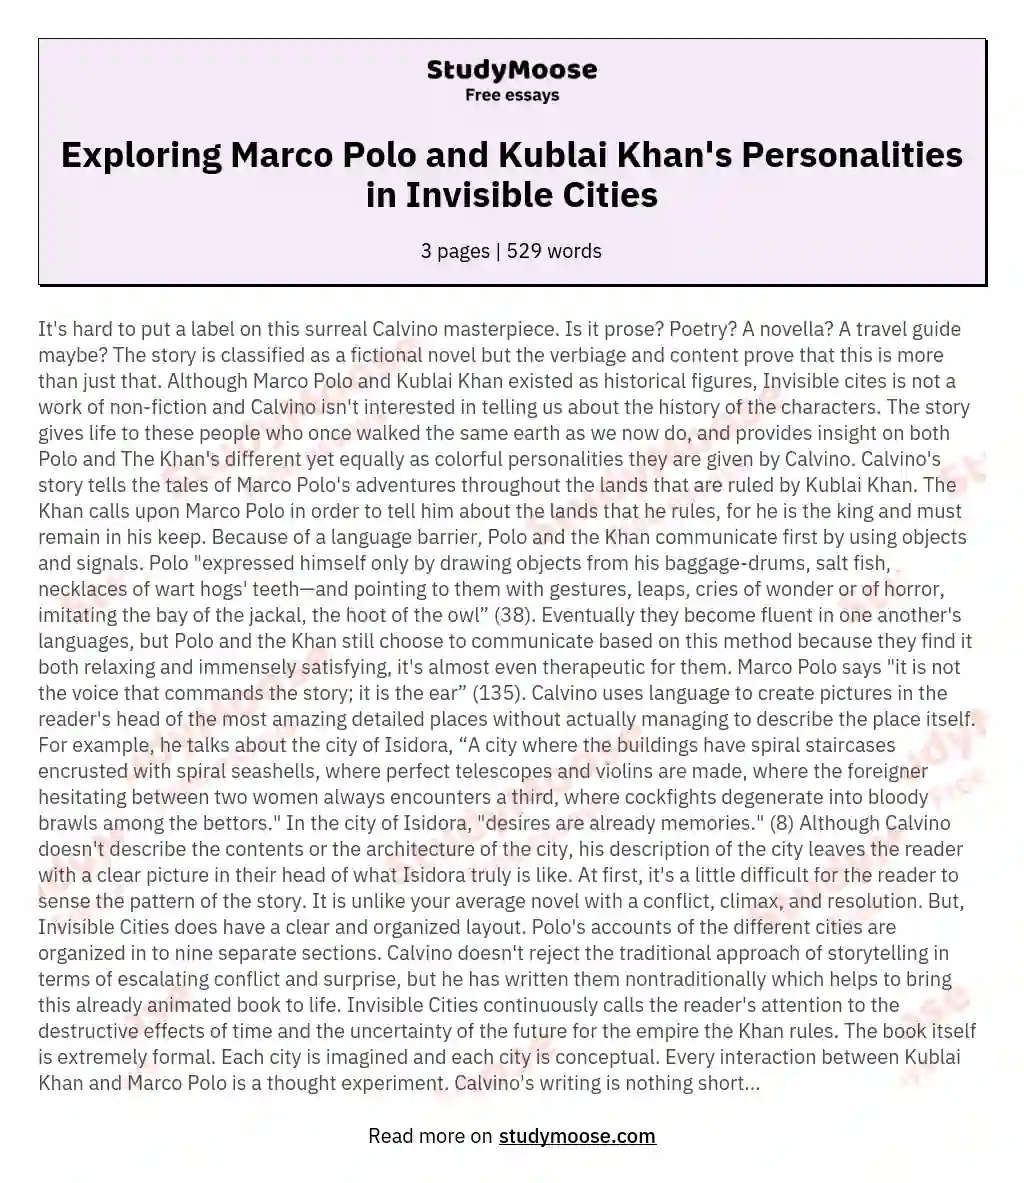 Exploring Marco Polo and Kublai Khan's Personalities in Invisible Cities essay